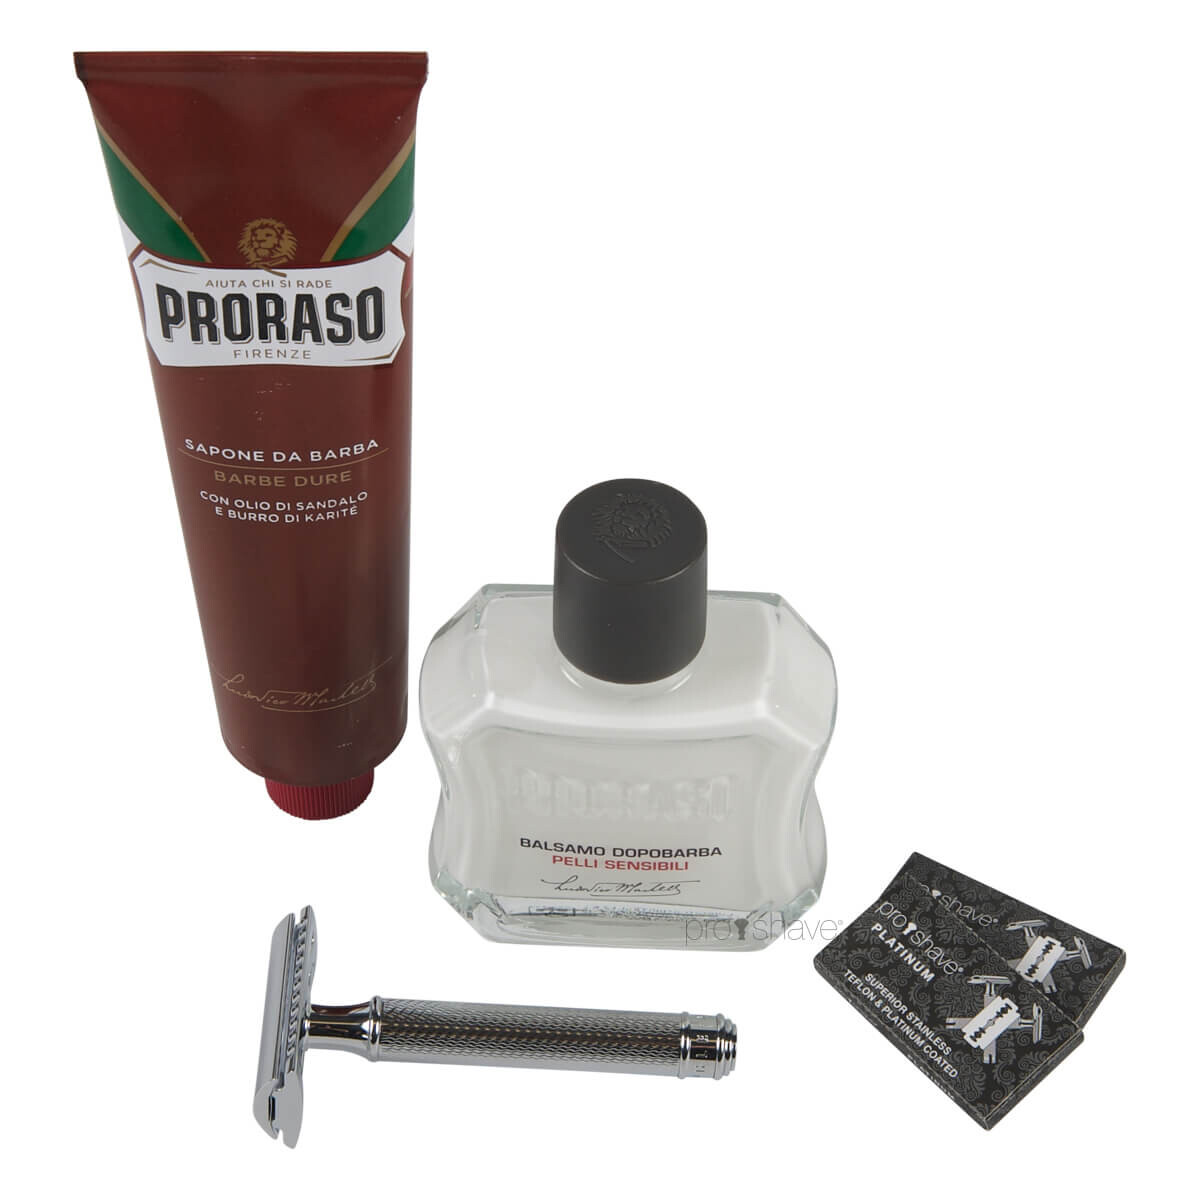 Head shaving products